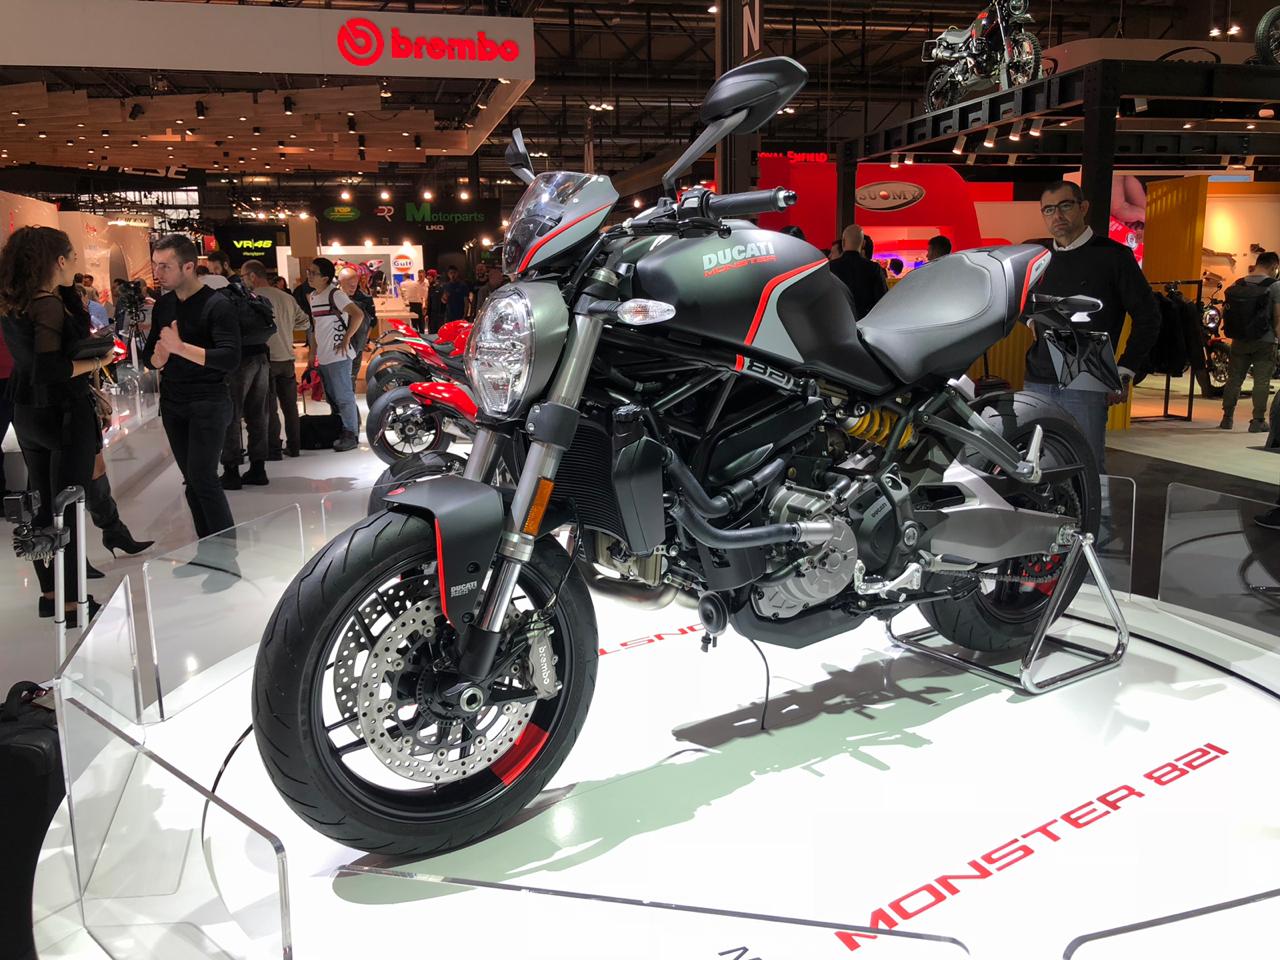 <p>Also shown by the Italian&nbsp;motorcycle manufacturer are the Ducati&nbsp;Diavel and Diavel&nbsp;S.&nbsp;The power cruiser&nbsp;offering from Ducati comes with a Testastretta DVT 1262 engine, that is capable of delivering 159 hp at 9,500rpm and generate 129Nm at 7,500rpm.&nbsp; <a href="http://overdrive.in/news-cars-auto/eicma-2018-ducati-diavel-1260-and-s-details-out/">Read more about the new Diavel here.&nbsp;</a></p>